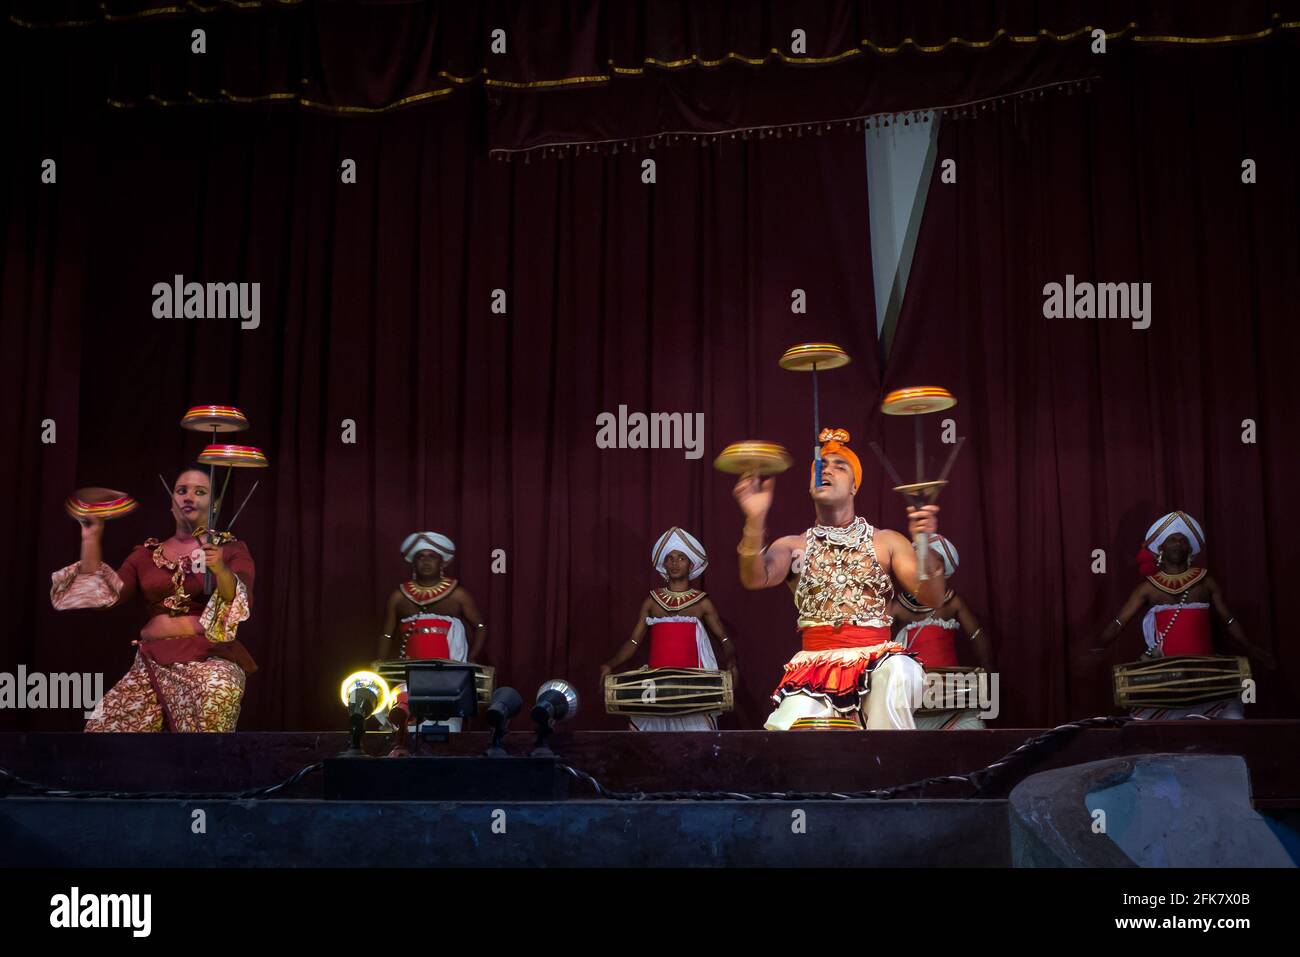 Kandy, Sri Lanka: a group of jugglers and musicians from the Kandyan Arts Association performs with a juggling performance on the stage Stock Photo